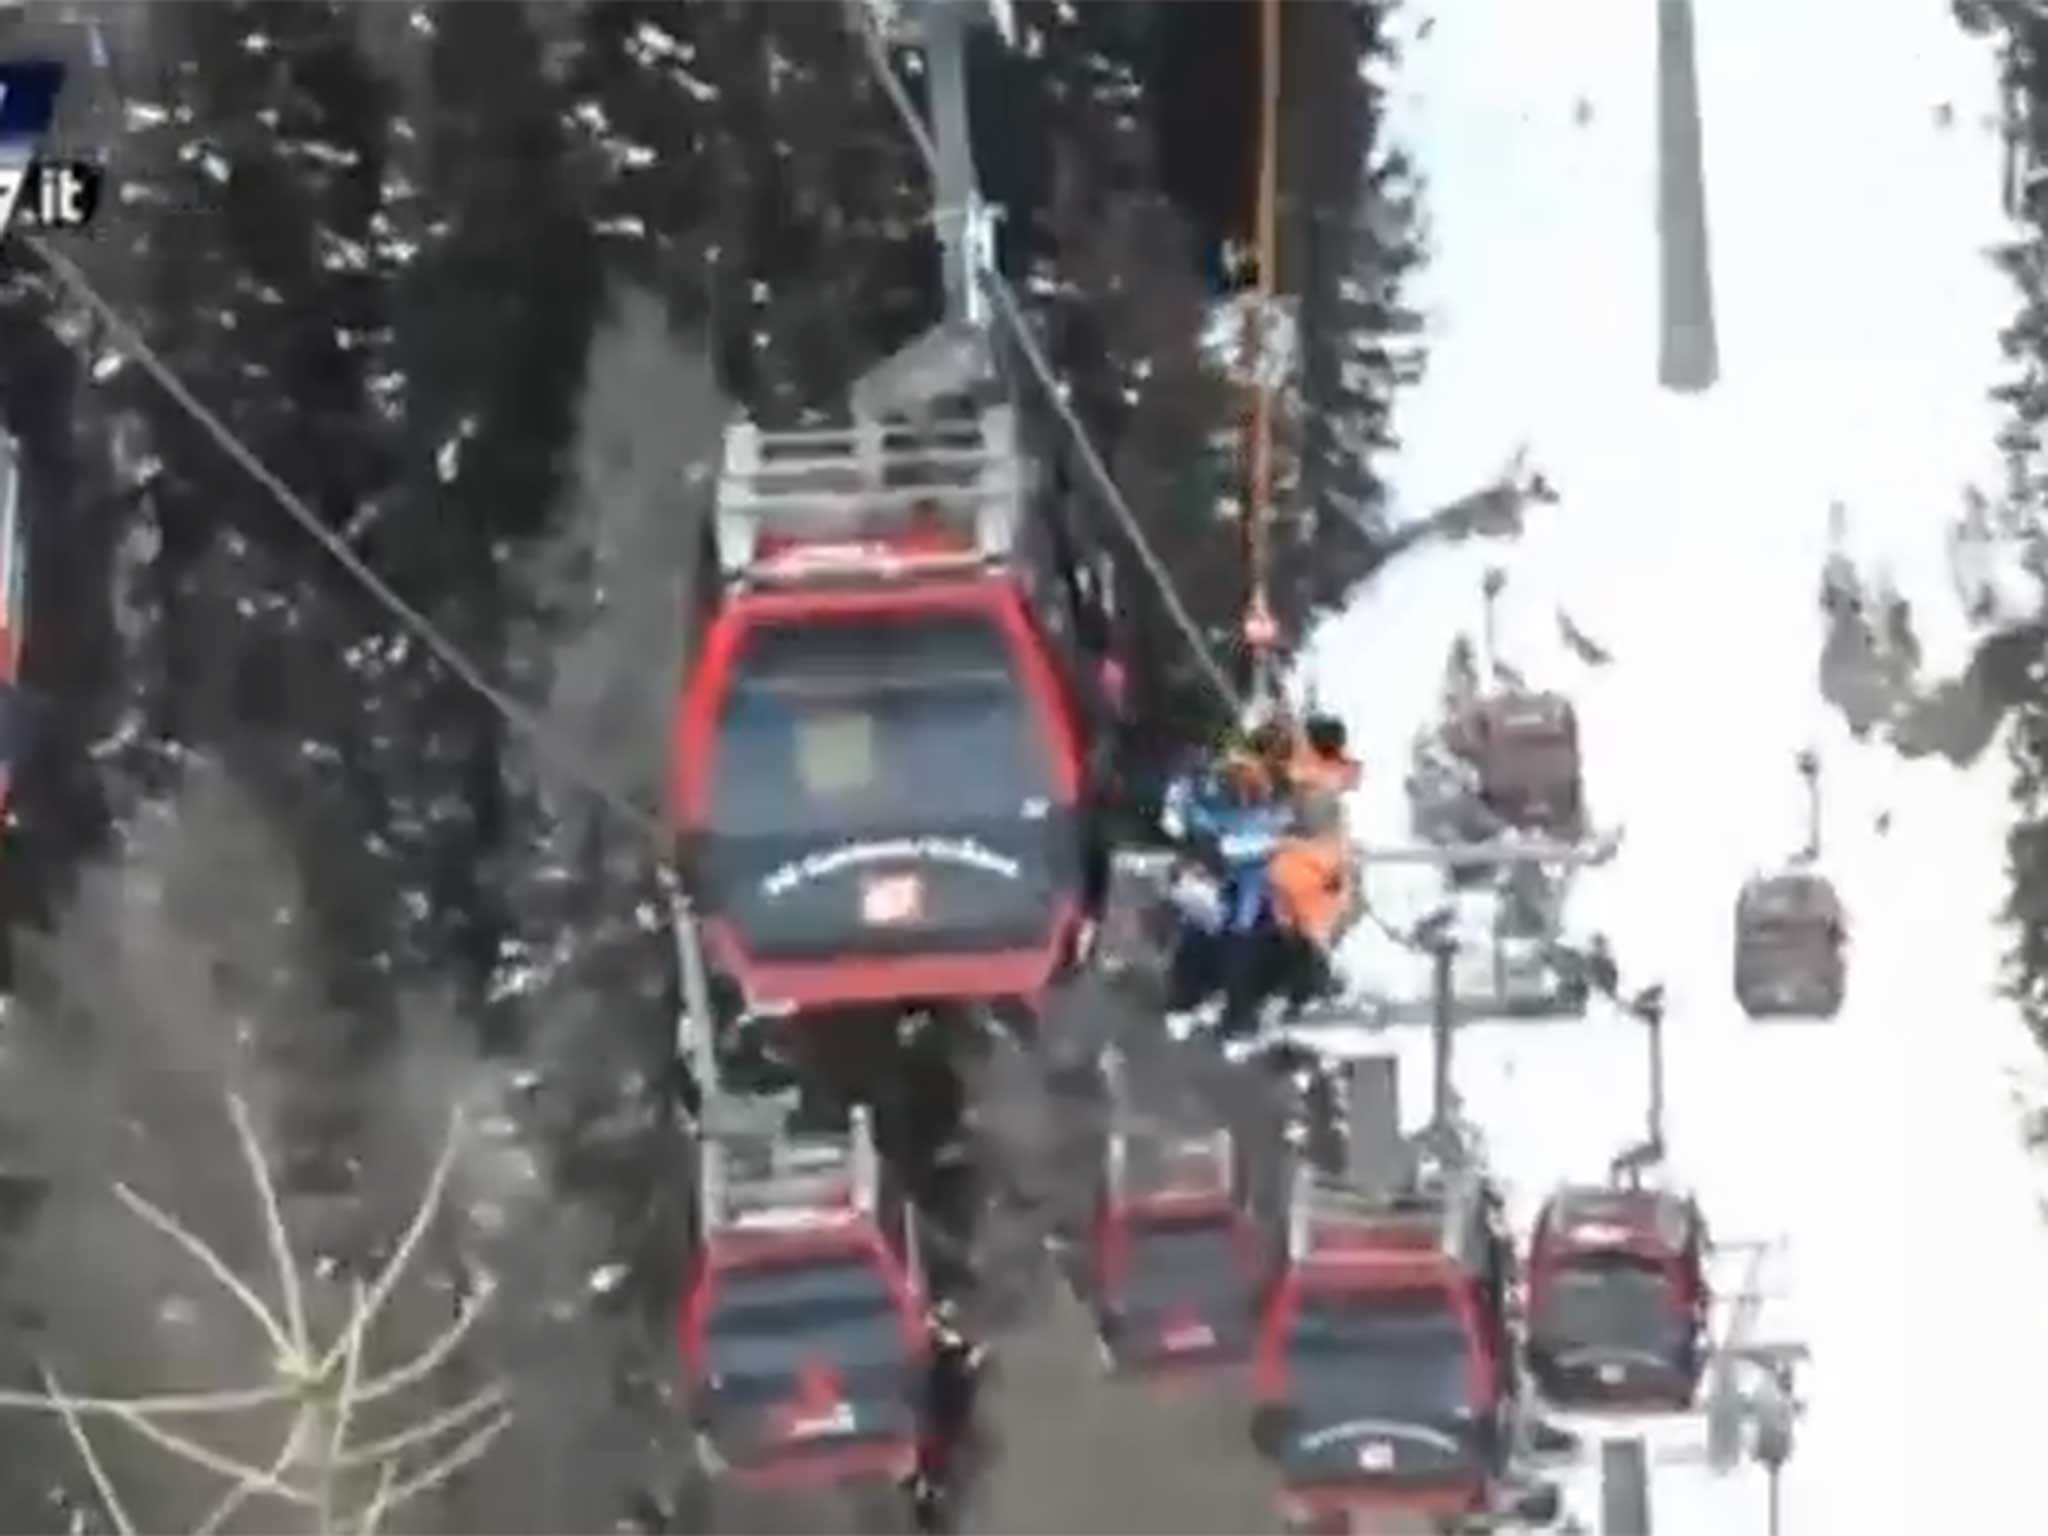 Skiers are lowered to safety after the cable car is stopped